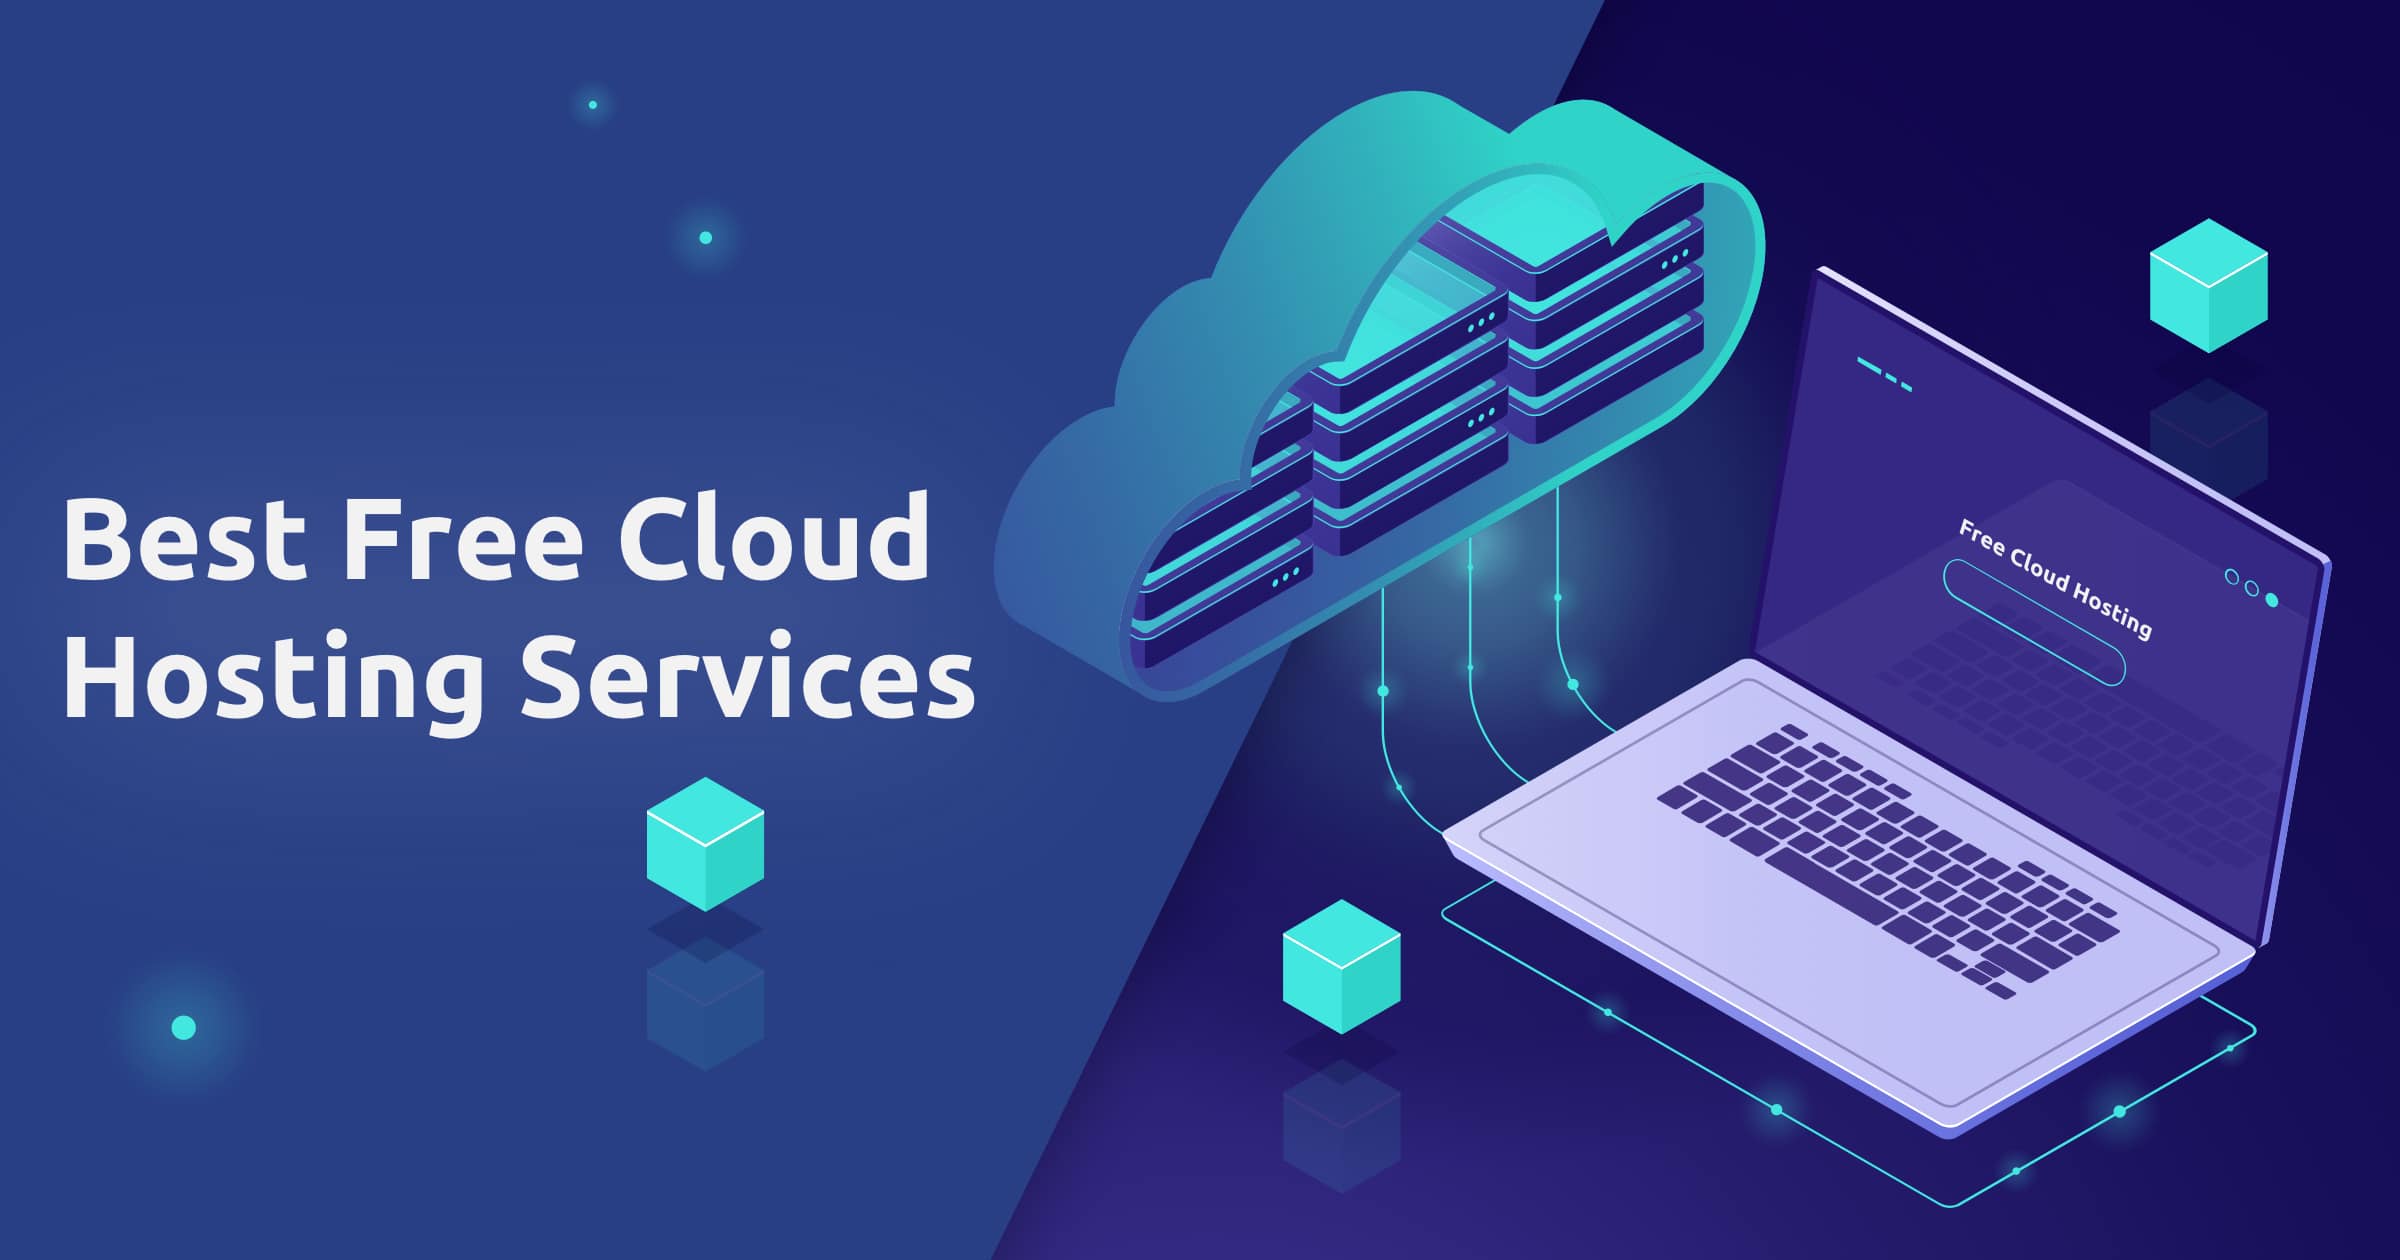 5 Best Completely Free Cloud Hosting Services 2020 Update Images, Photos, Reviews